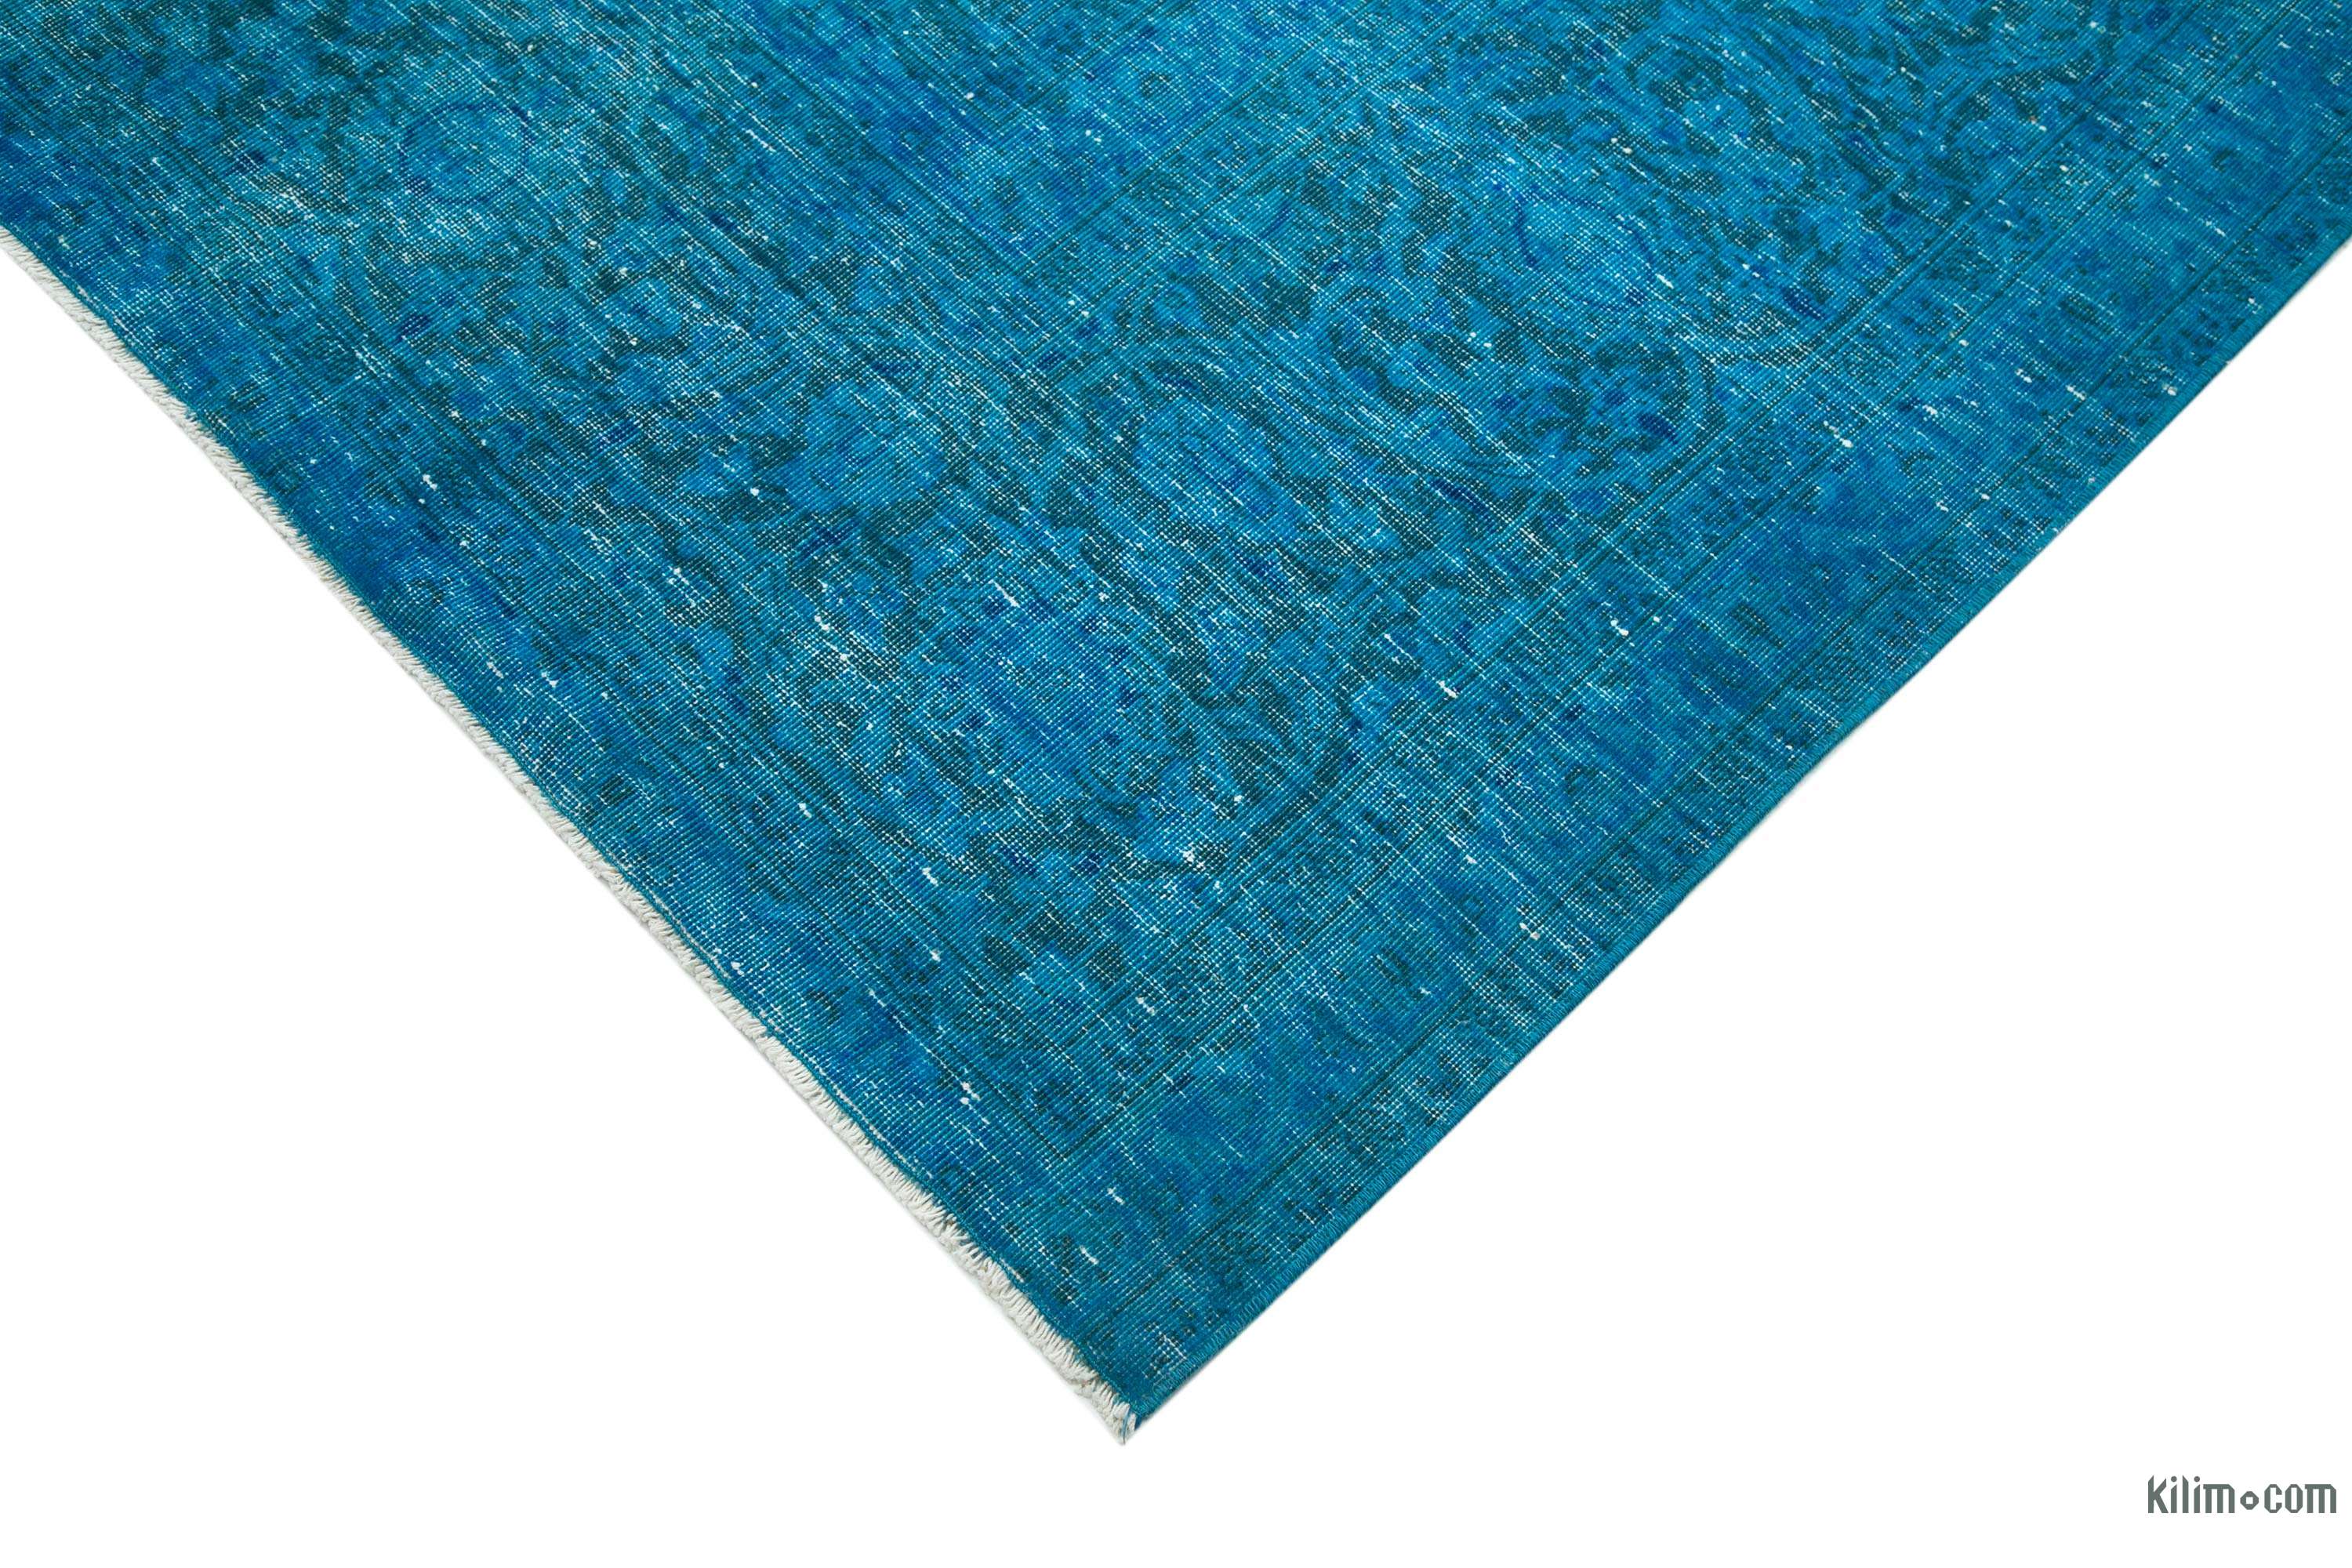 K0041209 Aqua Over-dyed Vintage Hand-Knotted Oriental Rug - 10' x 13' 3 ...